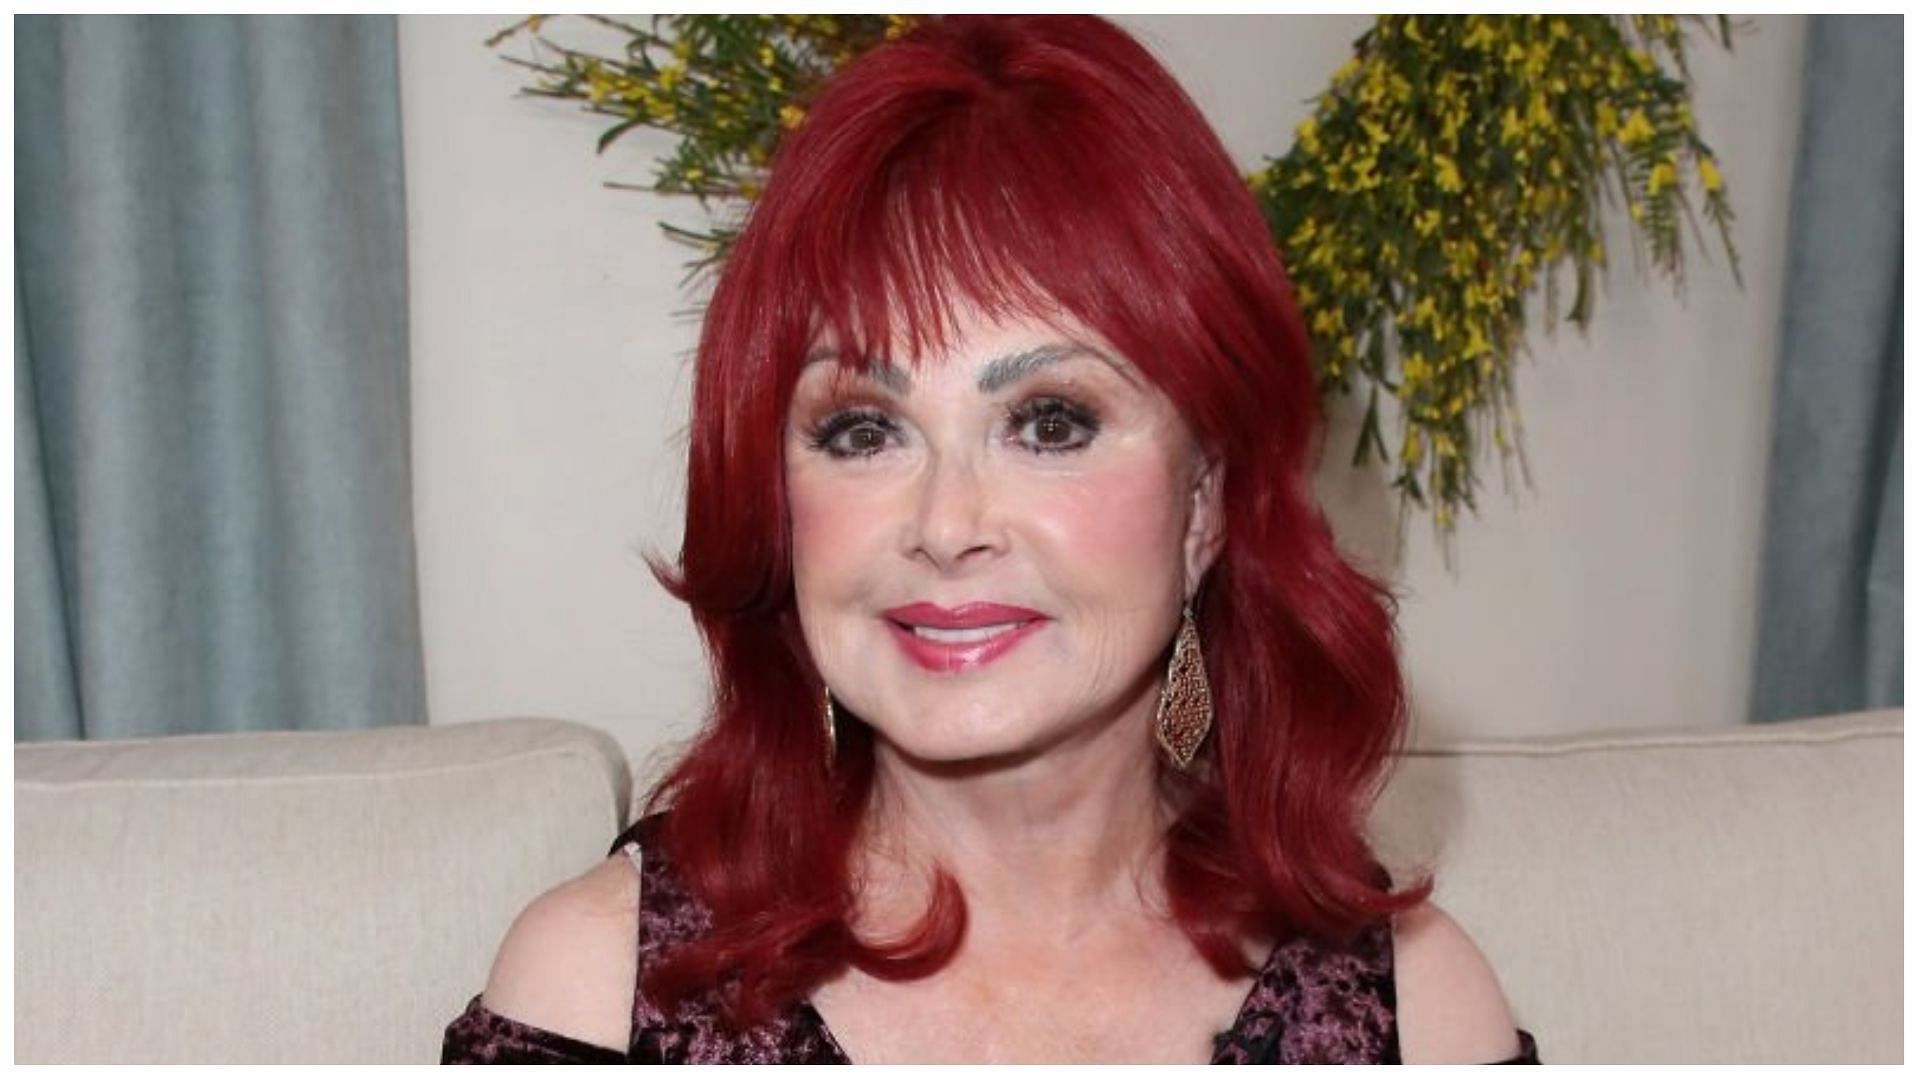 Naomi Judd earned a lot of wealth from her work in the entertainment industry (Image via David Livingston/Getty Images)